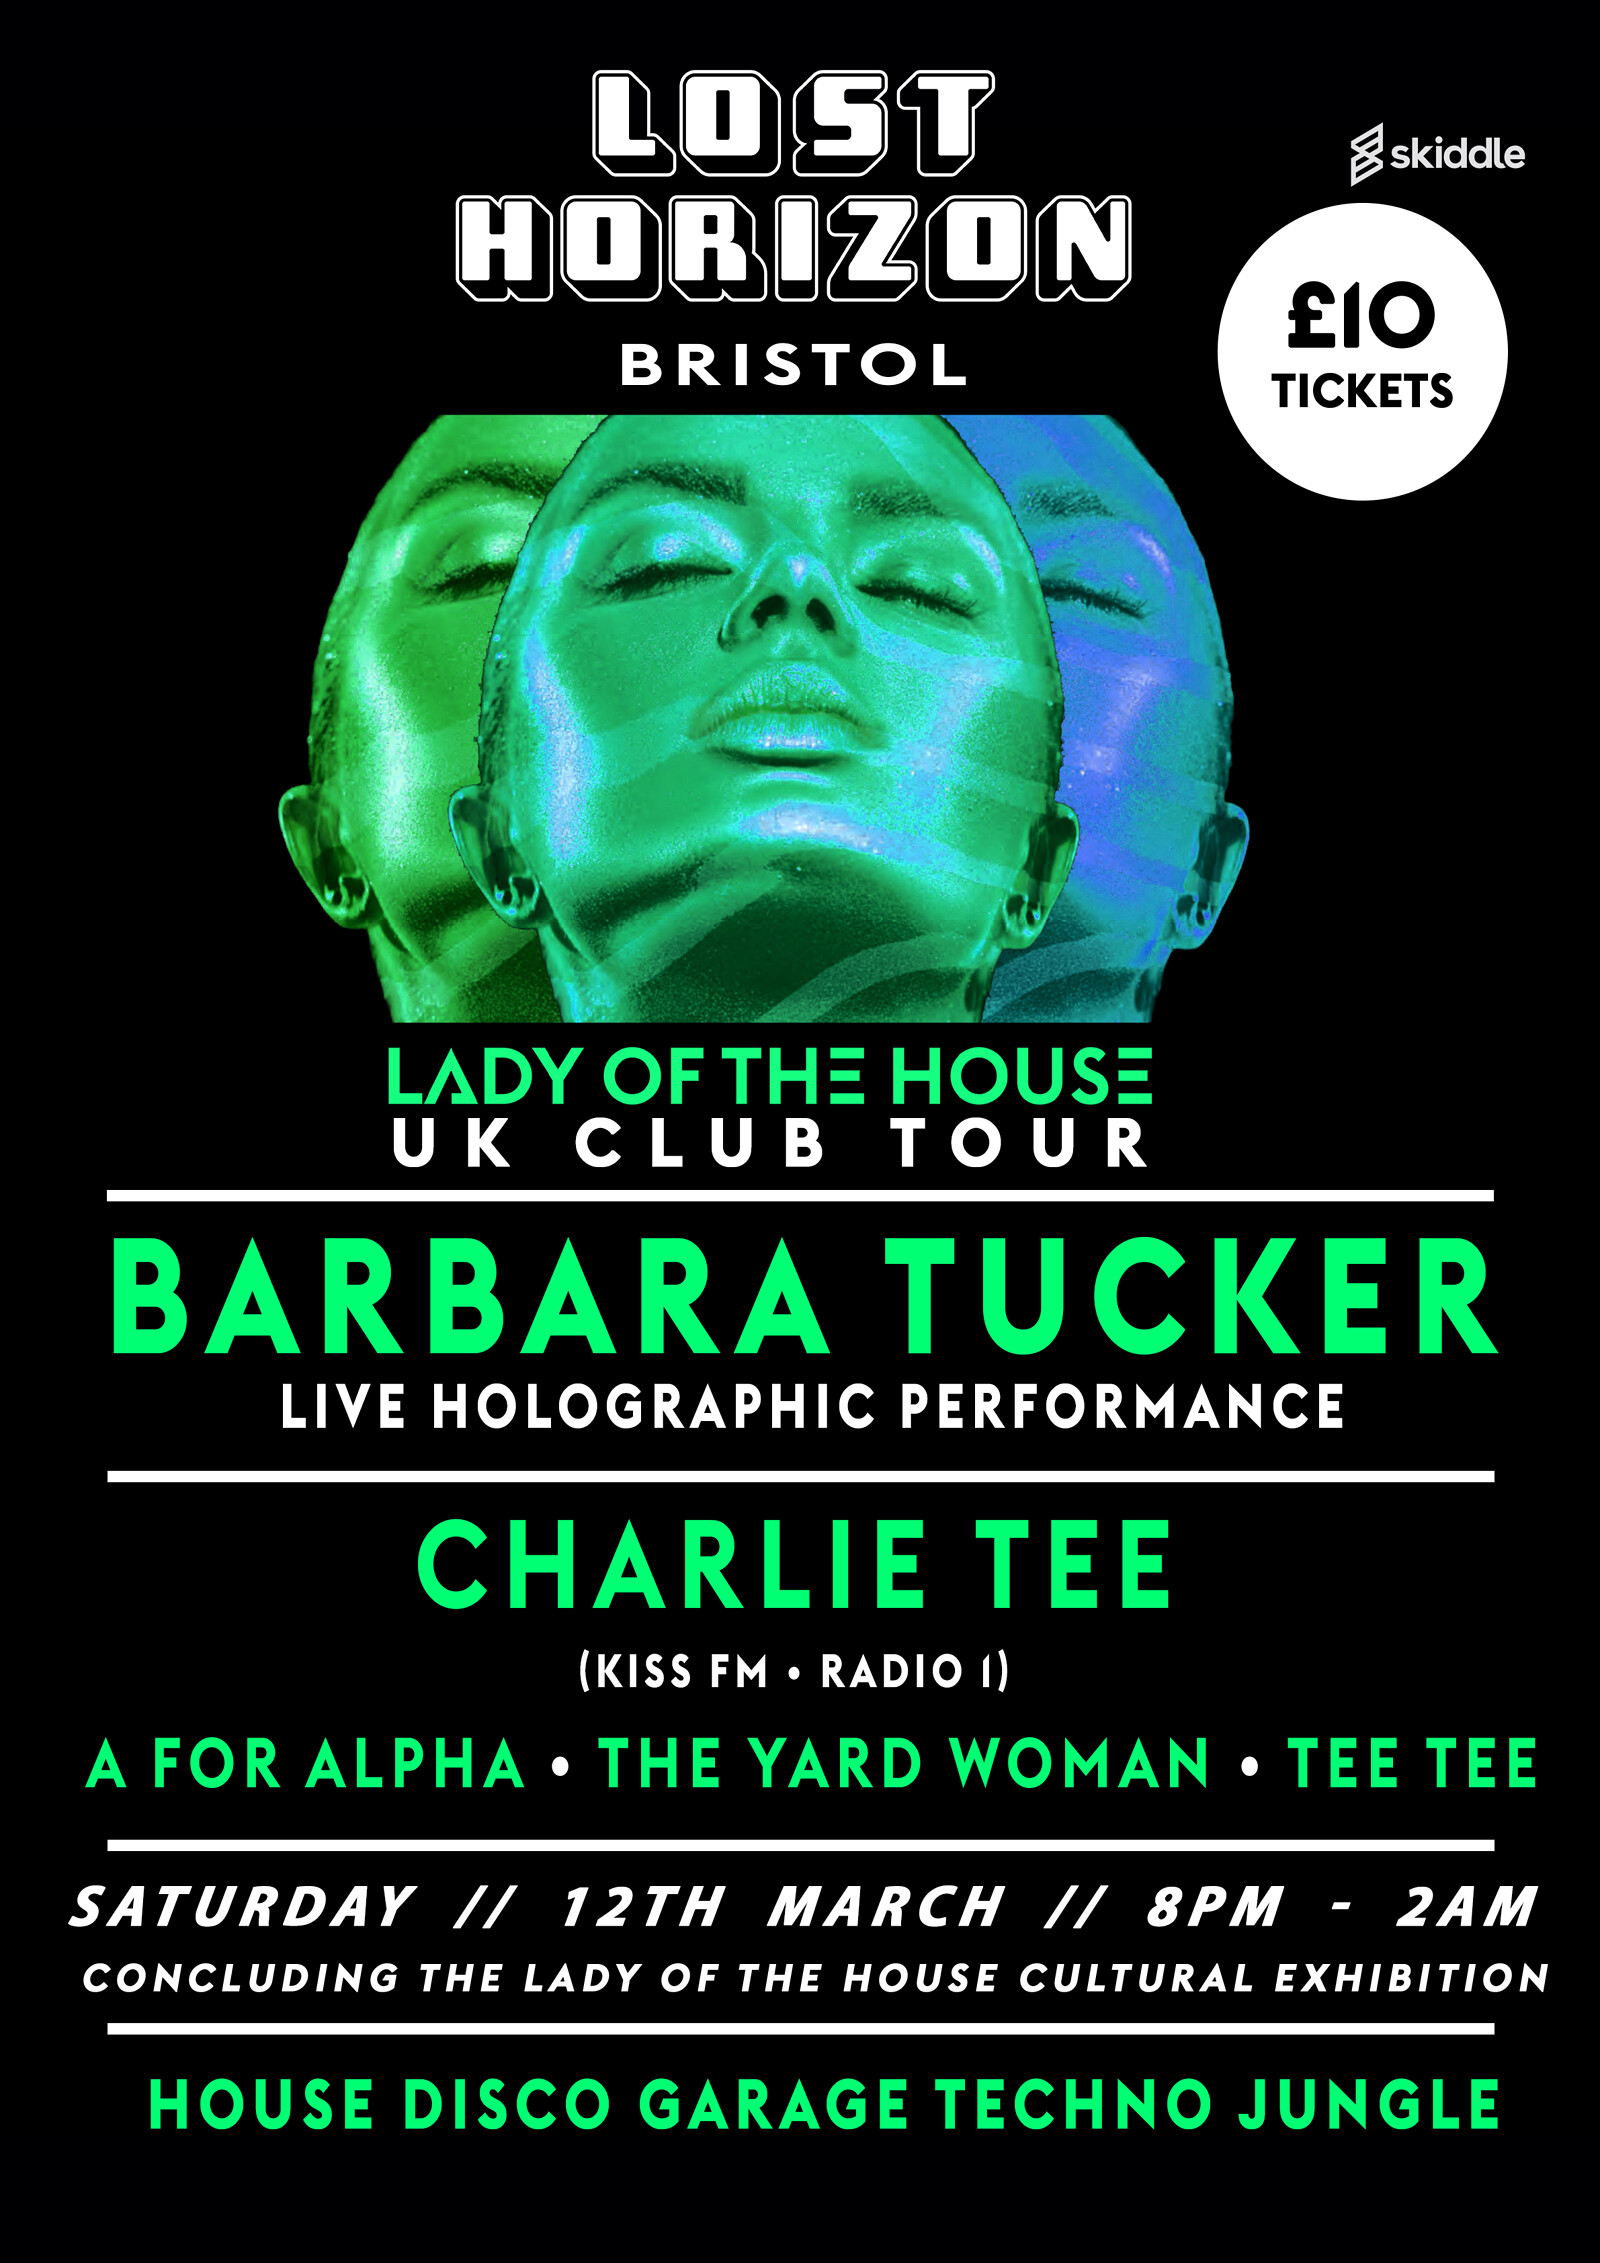 Lady Of The House UK Club Tour: Charlie Tee at Lost Horizon